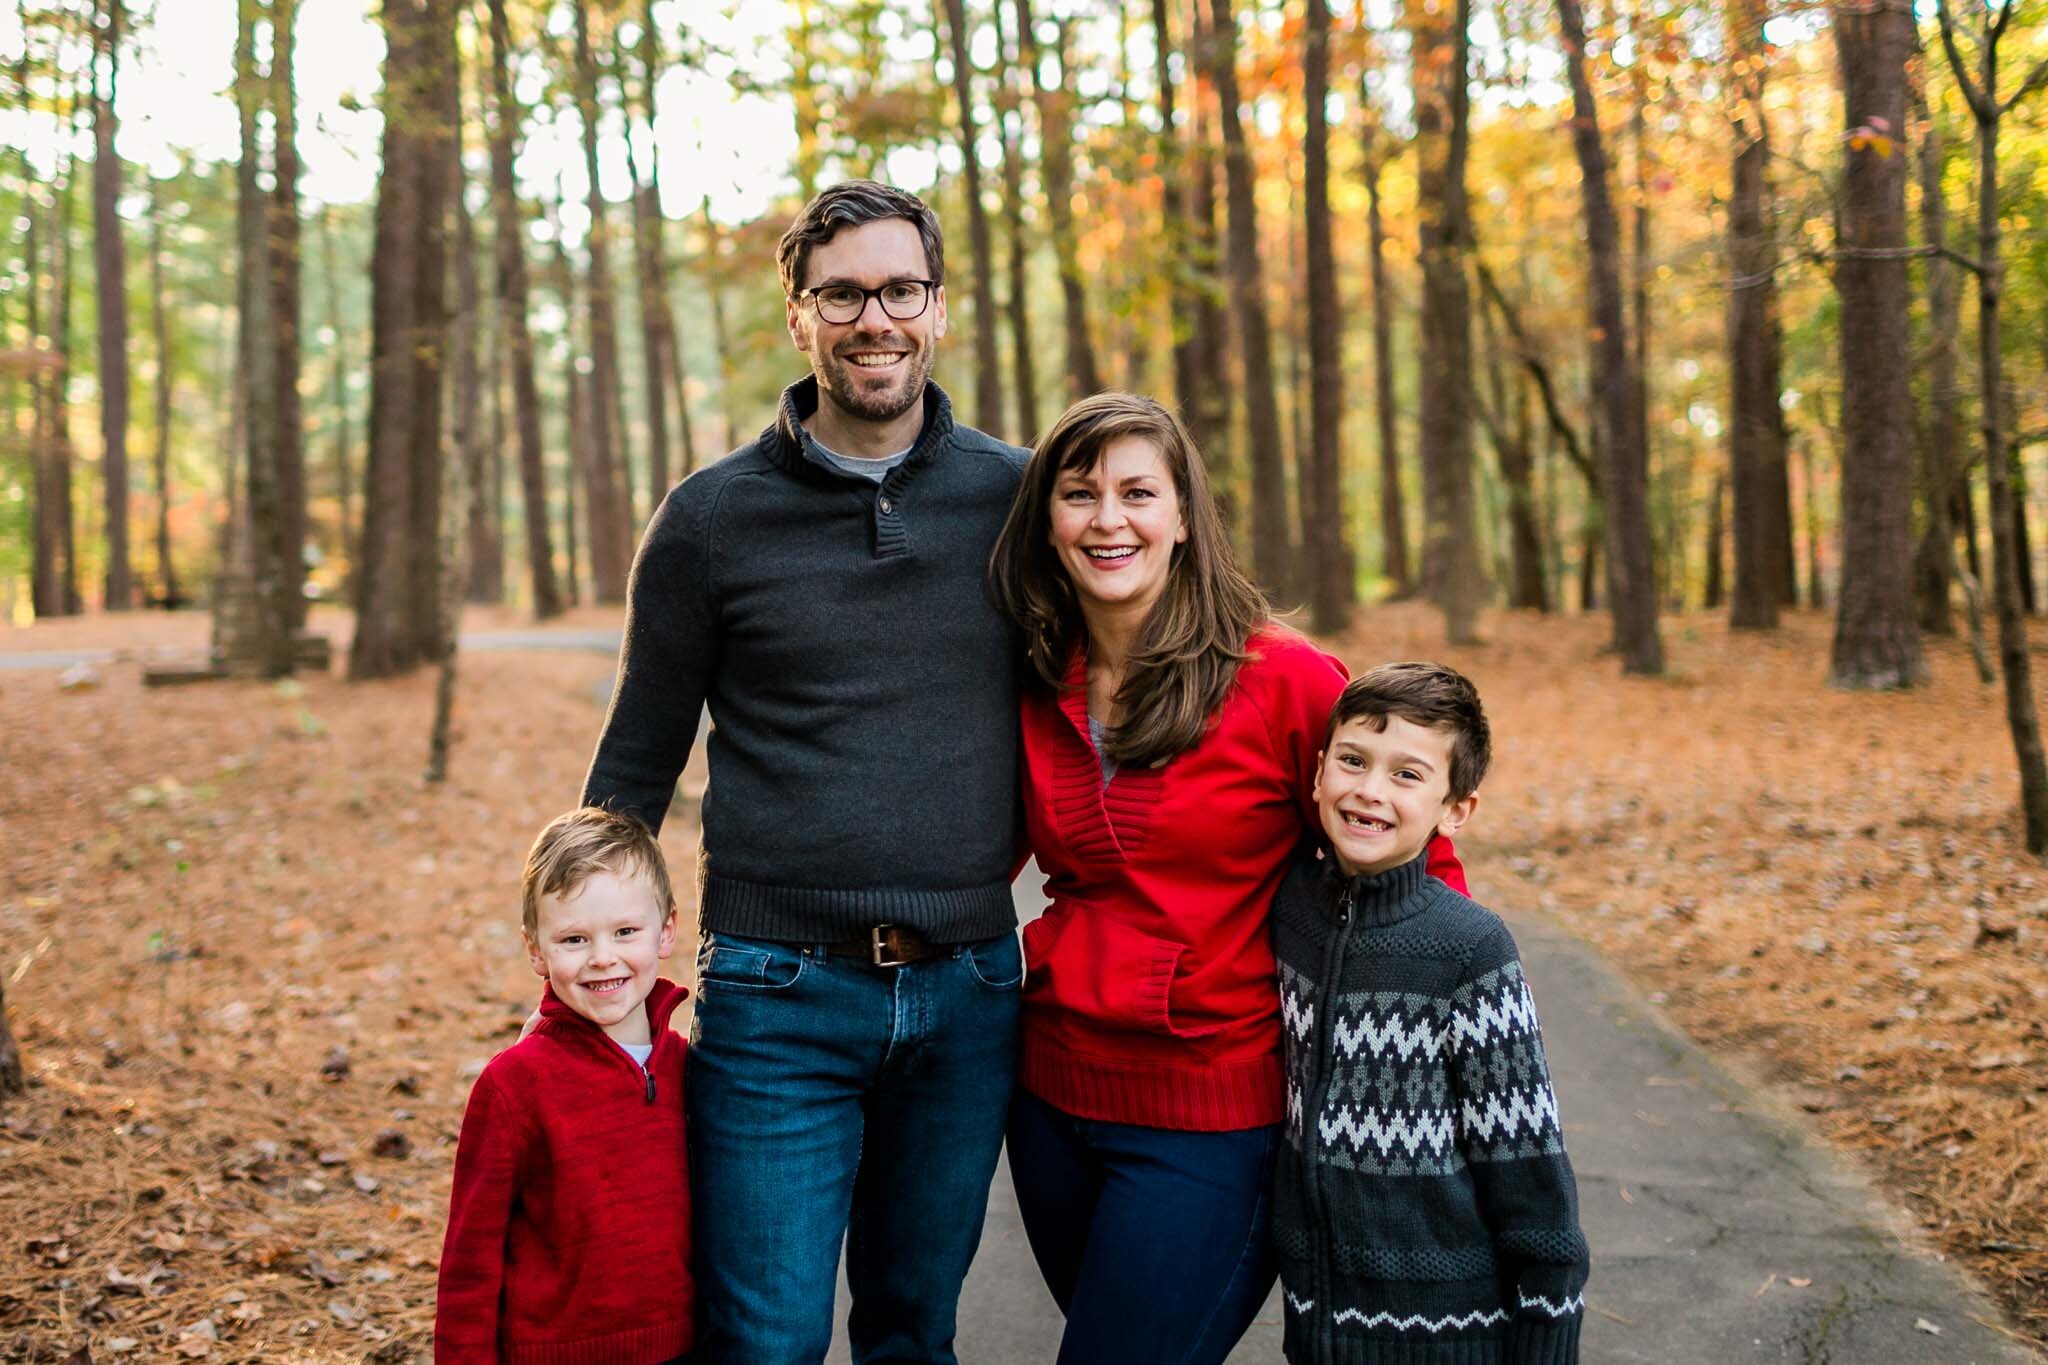 Candid Family Photography at Umstead Park | Raleigh Family Photographer | By G. Lin Photography